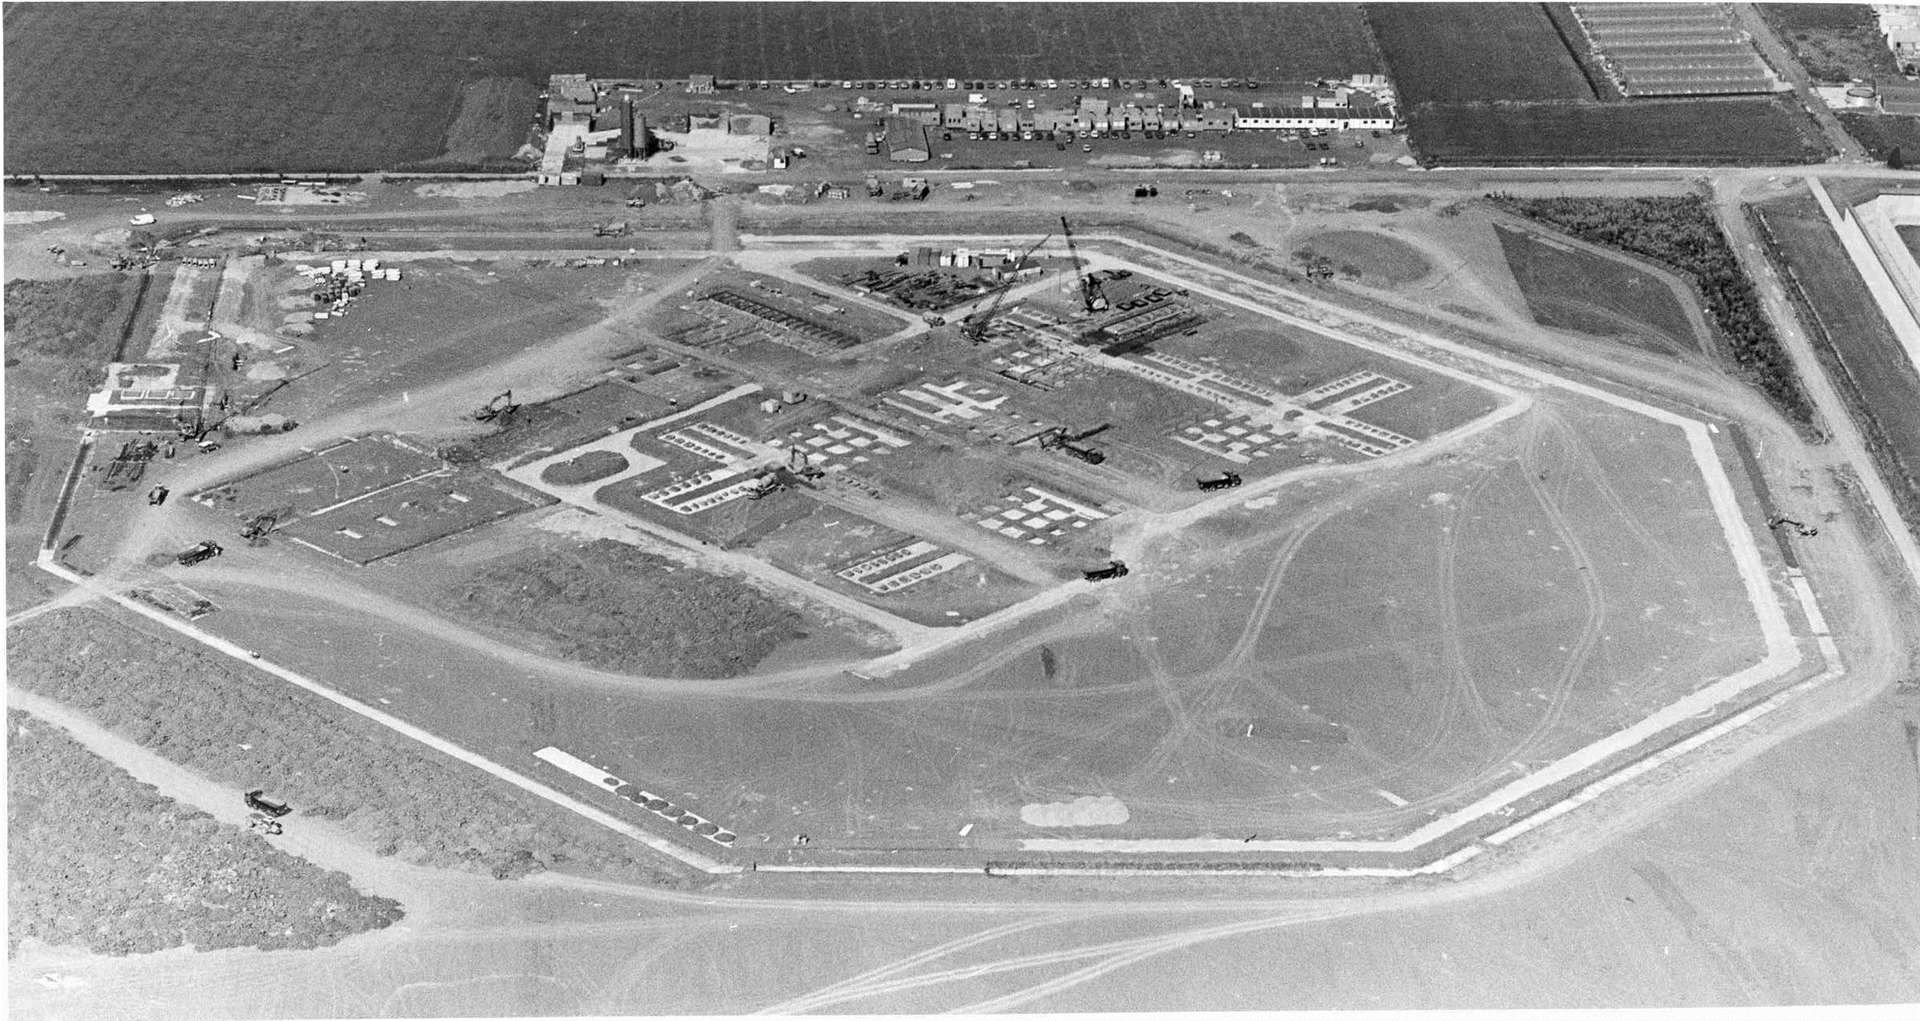 HMP Swaleside under construction in the 80s